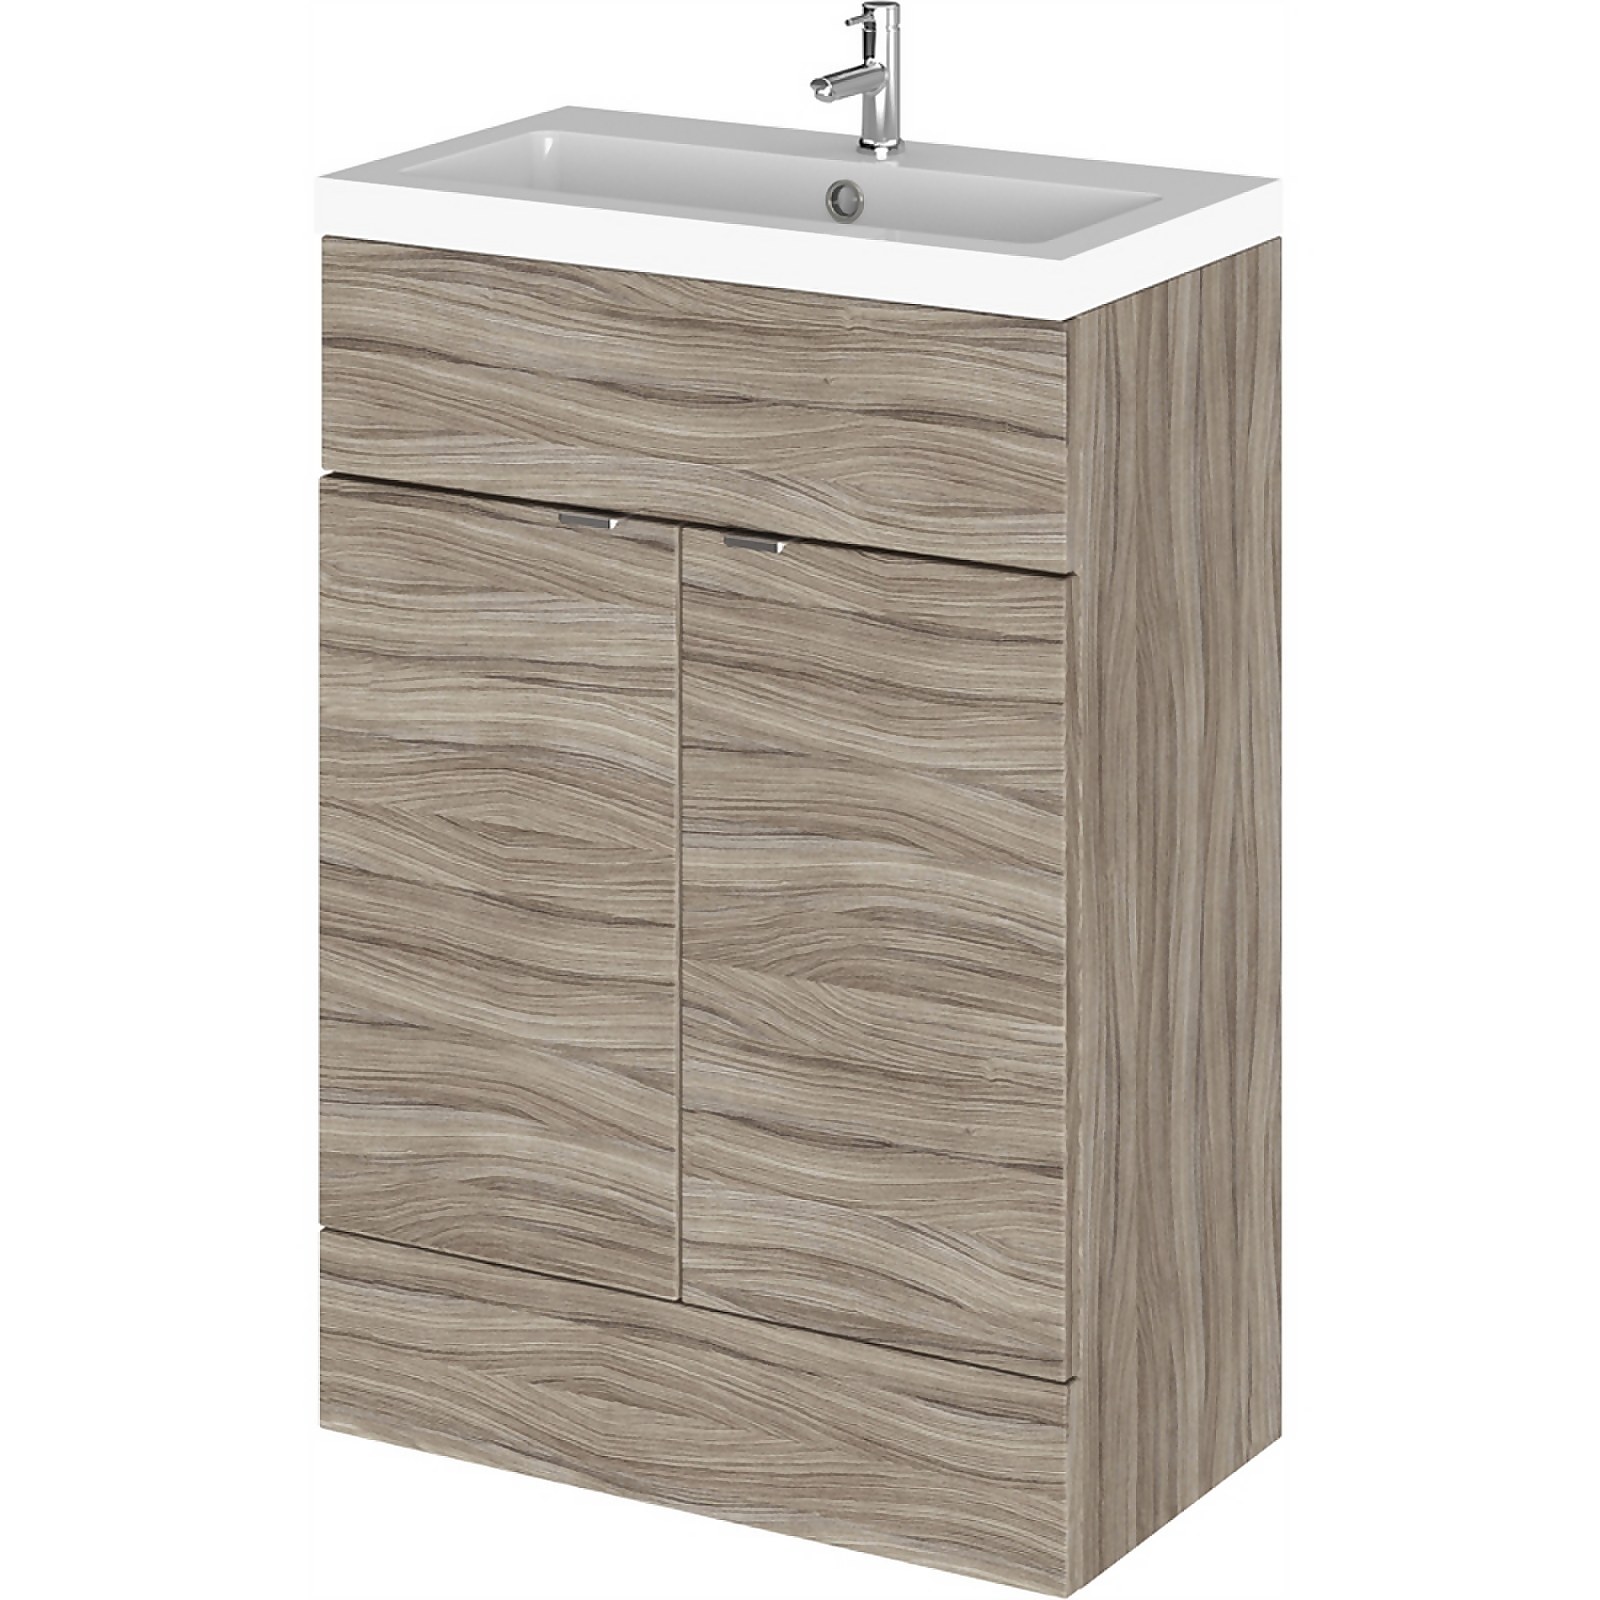 Photo of Balterley Dynamic 600mm Vanity Unit With Basin - Driftwood